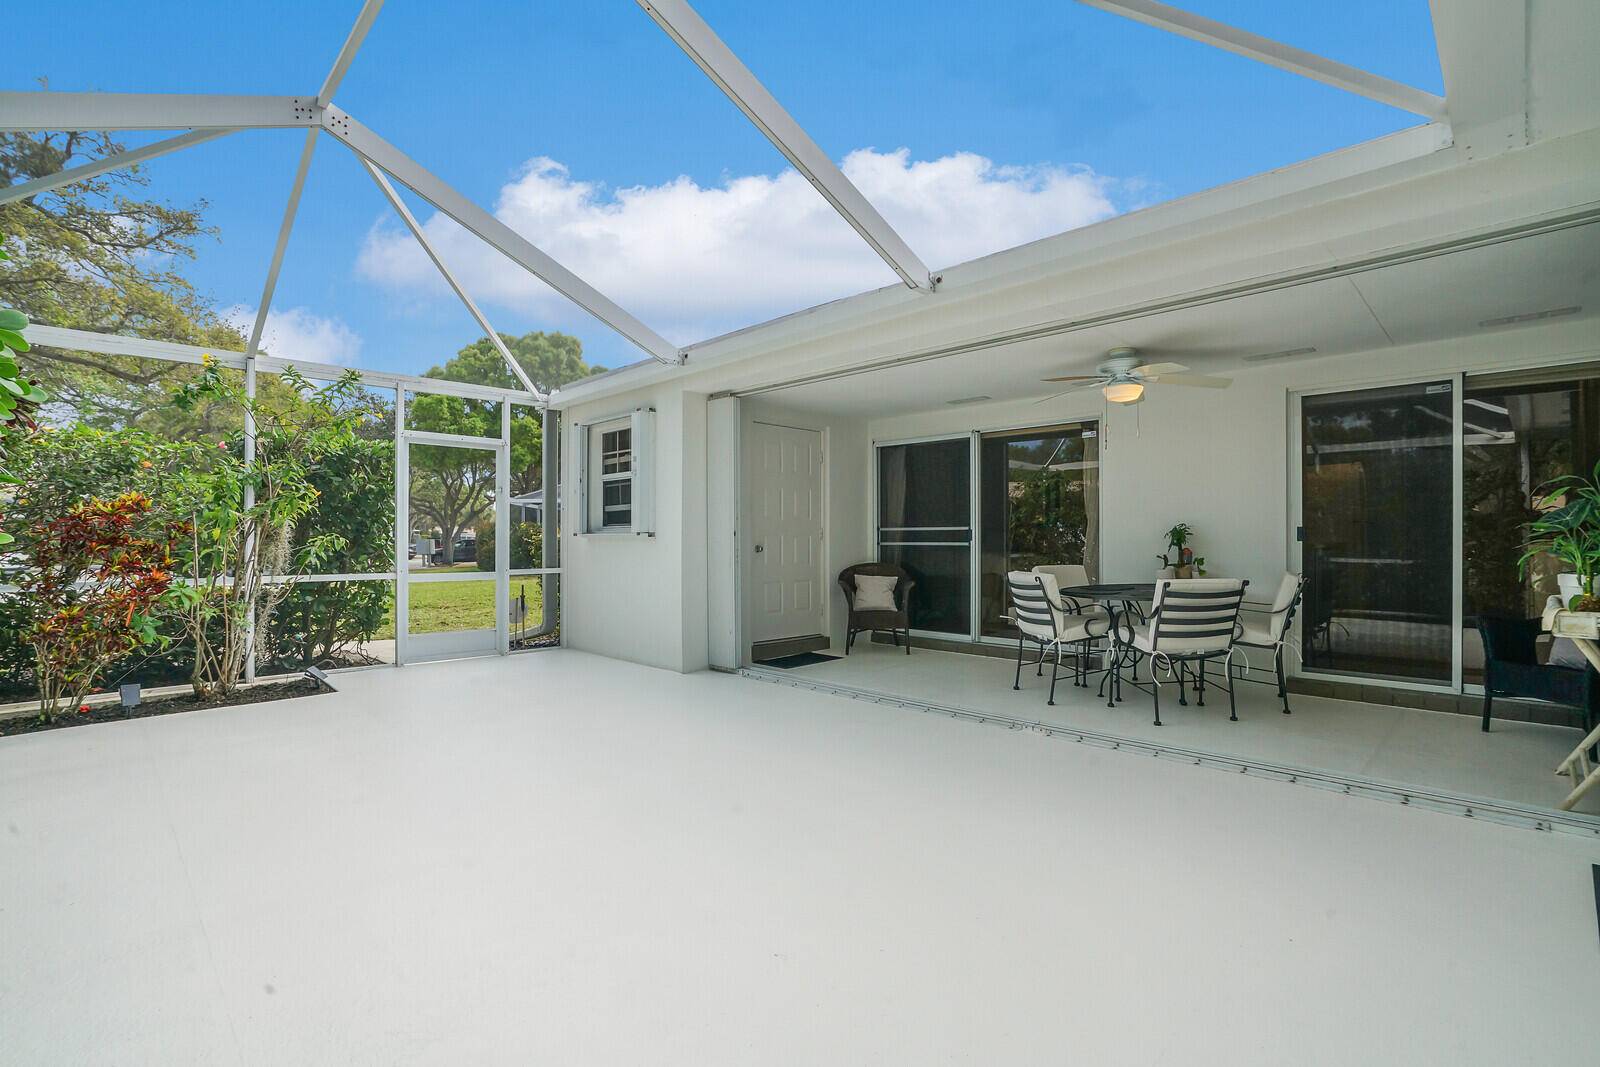 Welcome home ! Nestled in the heart of Palm Beach Gardens, this one story, two bedroom, two bathroom villa offers the ultimate in convenience and comfort.